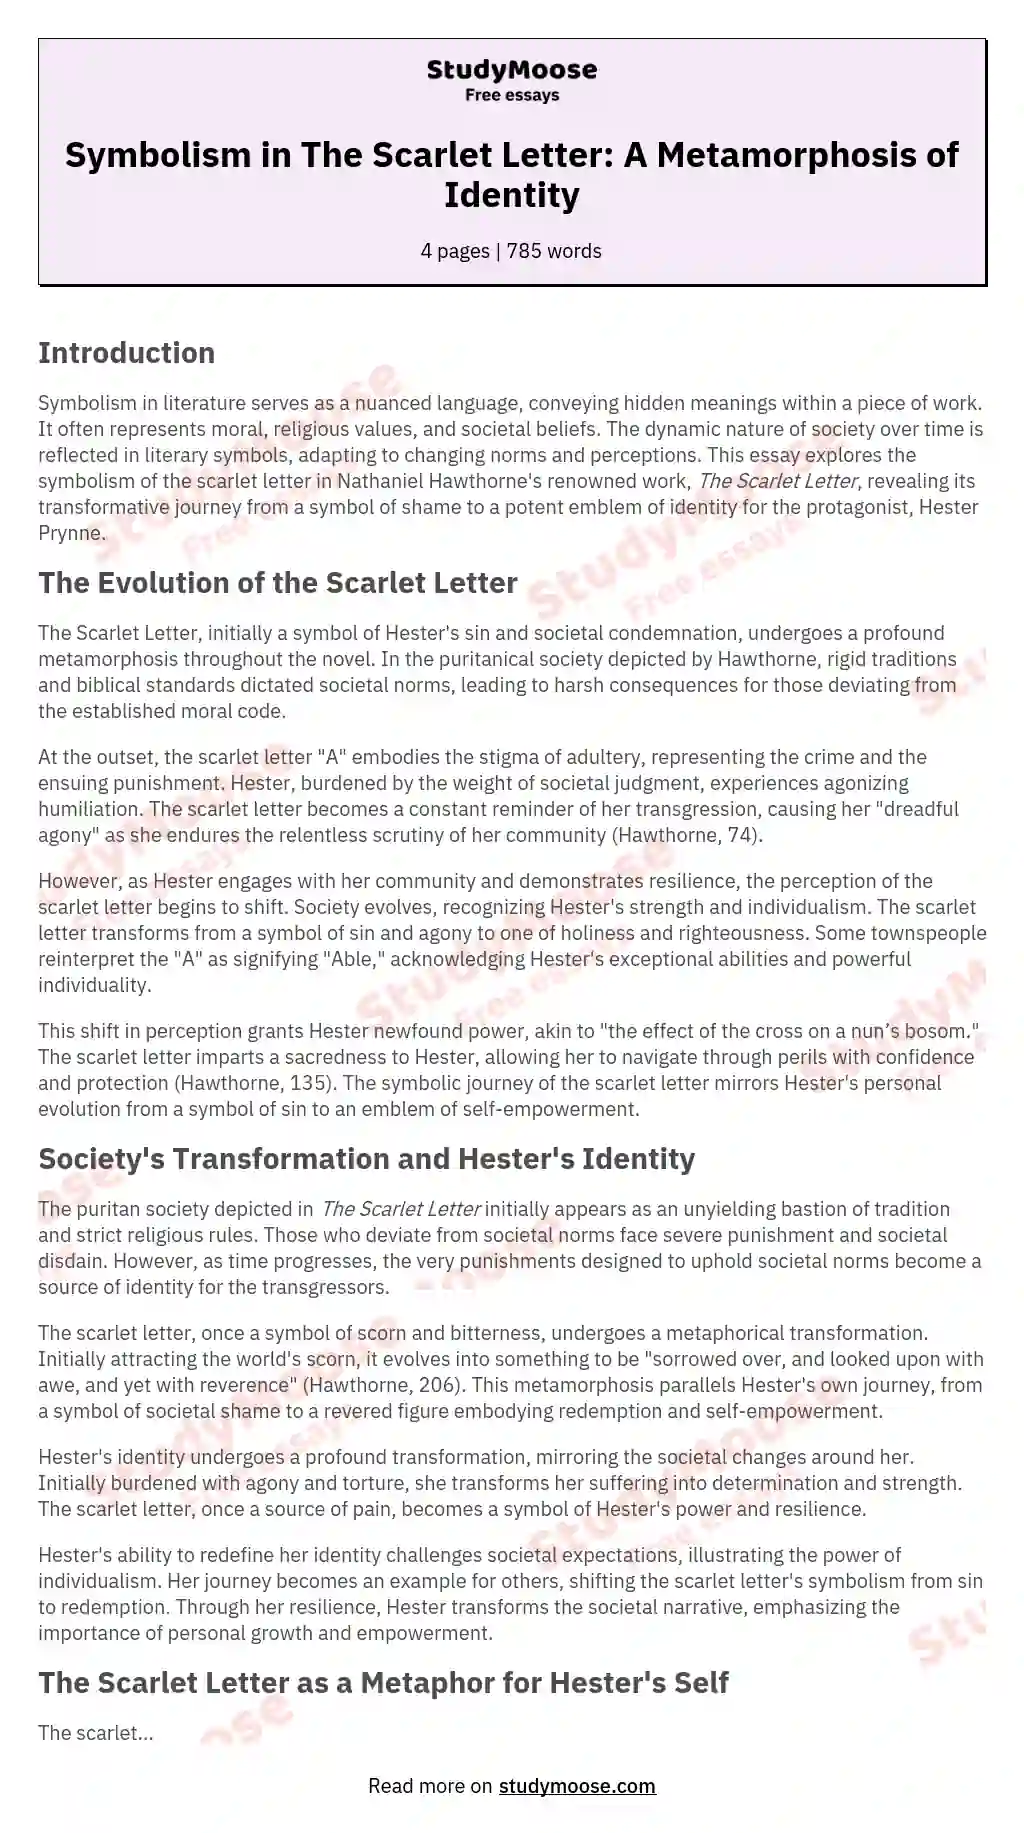 Symbolism in The Scarlet Letter: A Metamorphosis of Identity essay